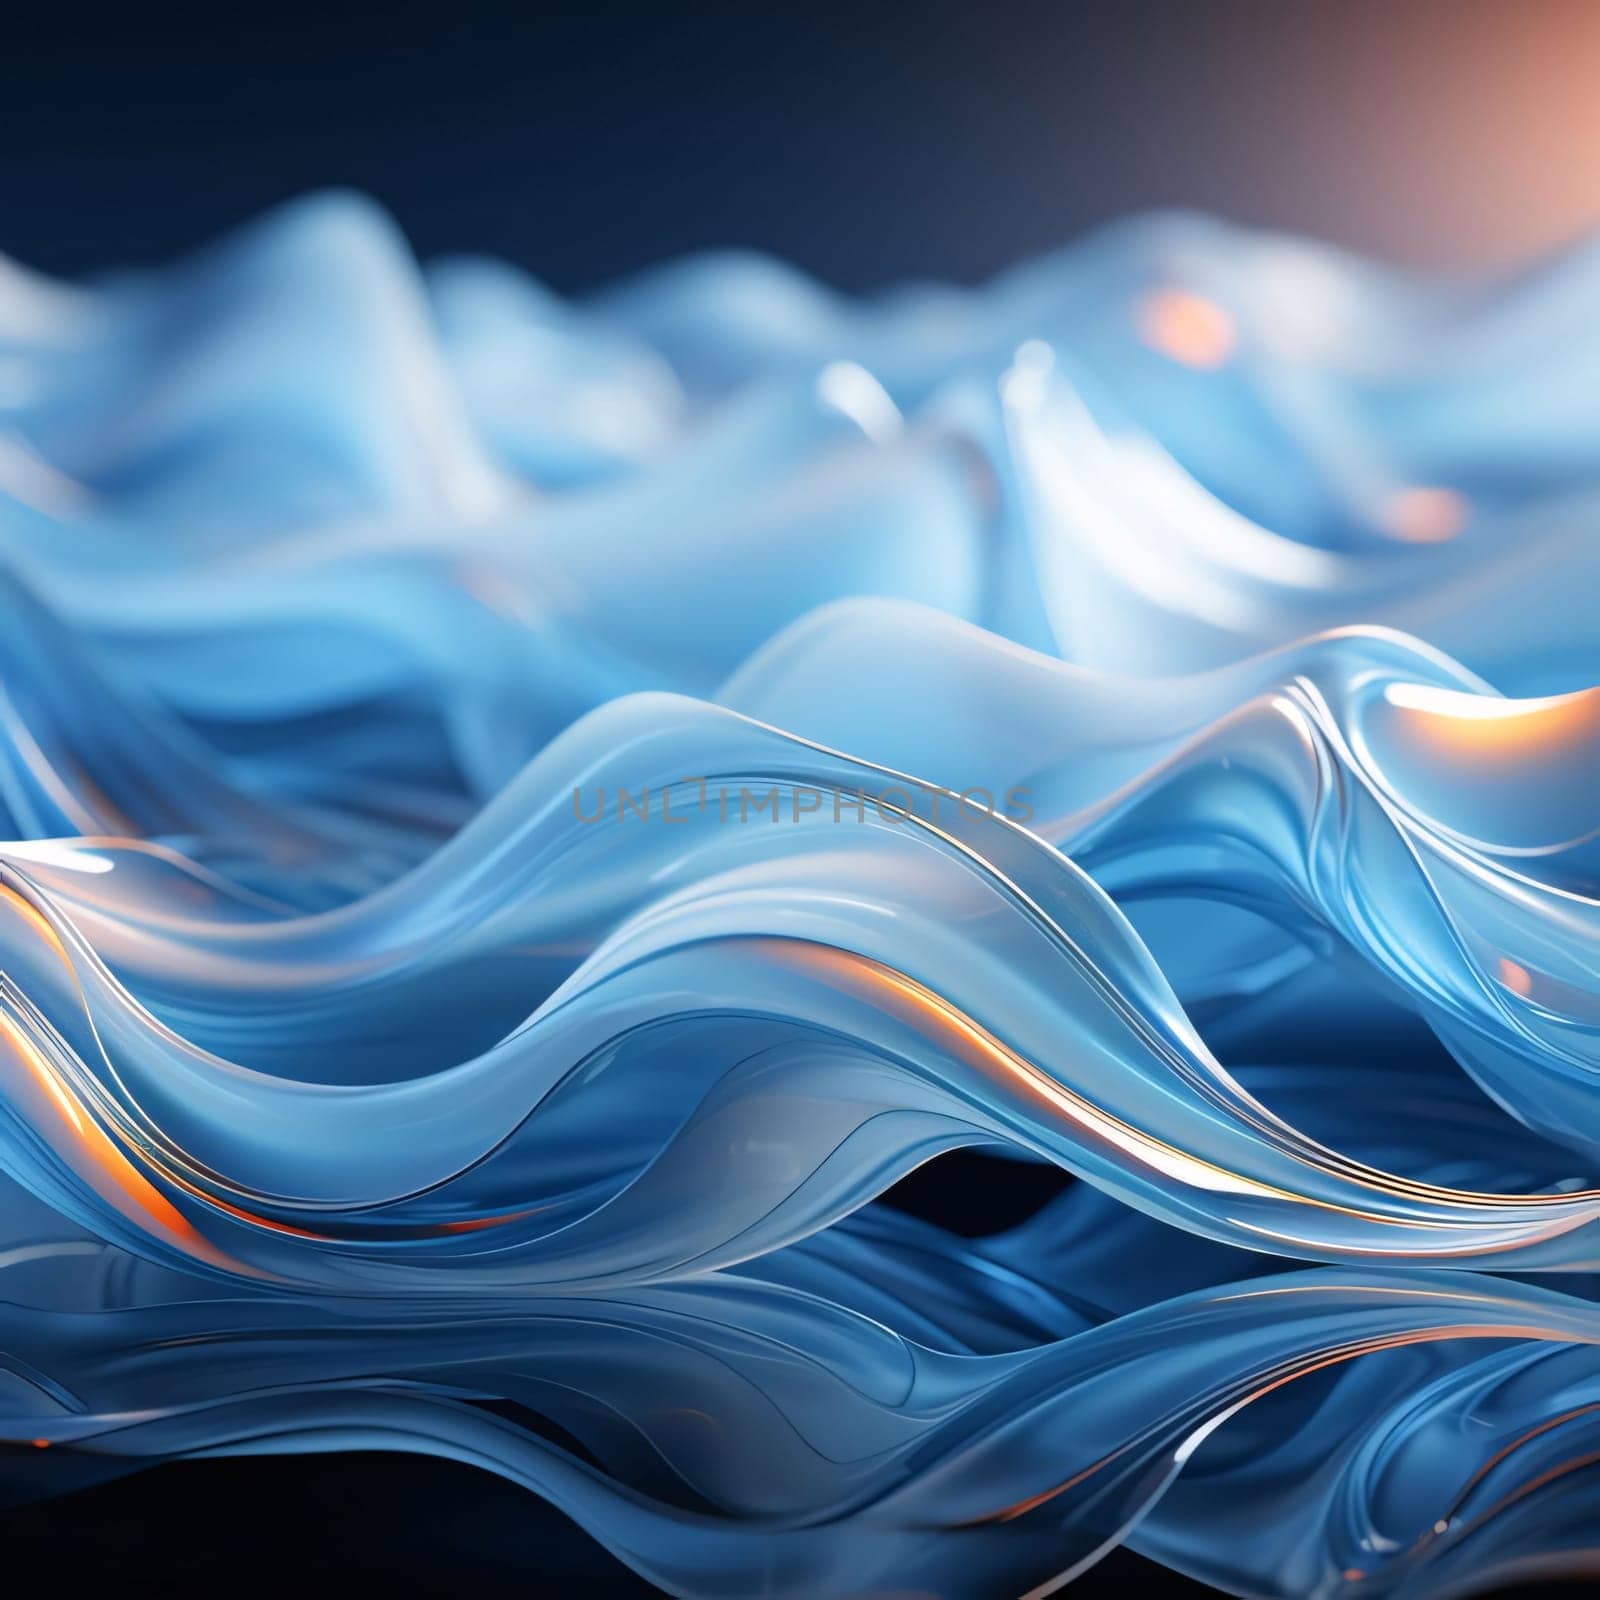 Abstract background design: Abstract blue wavy background. 3d rendering, 3d illustration.